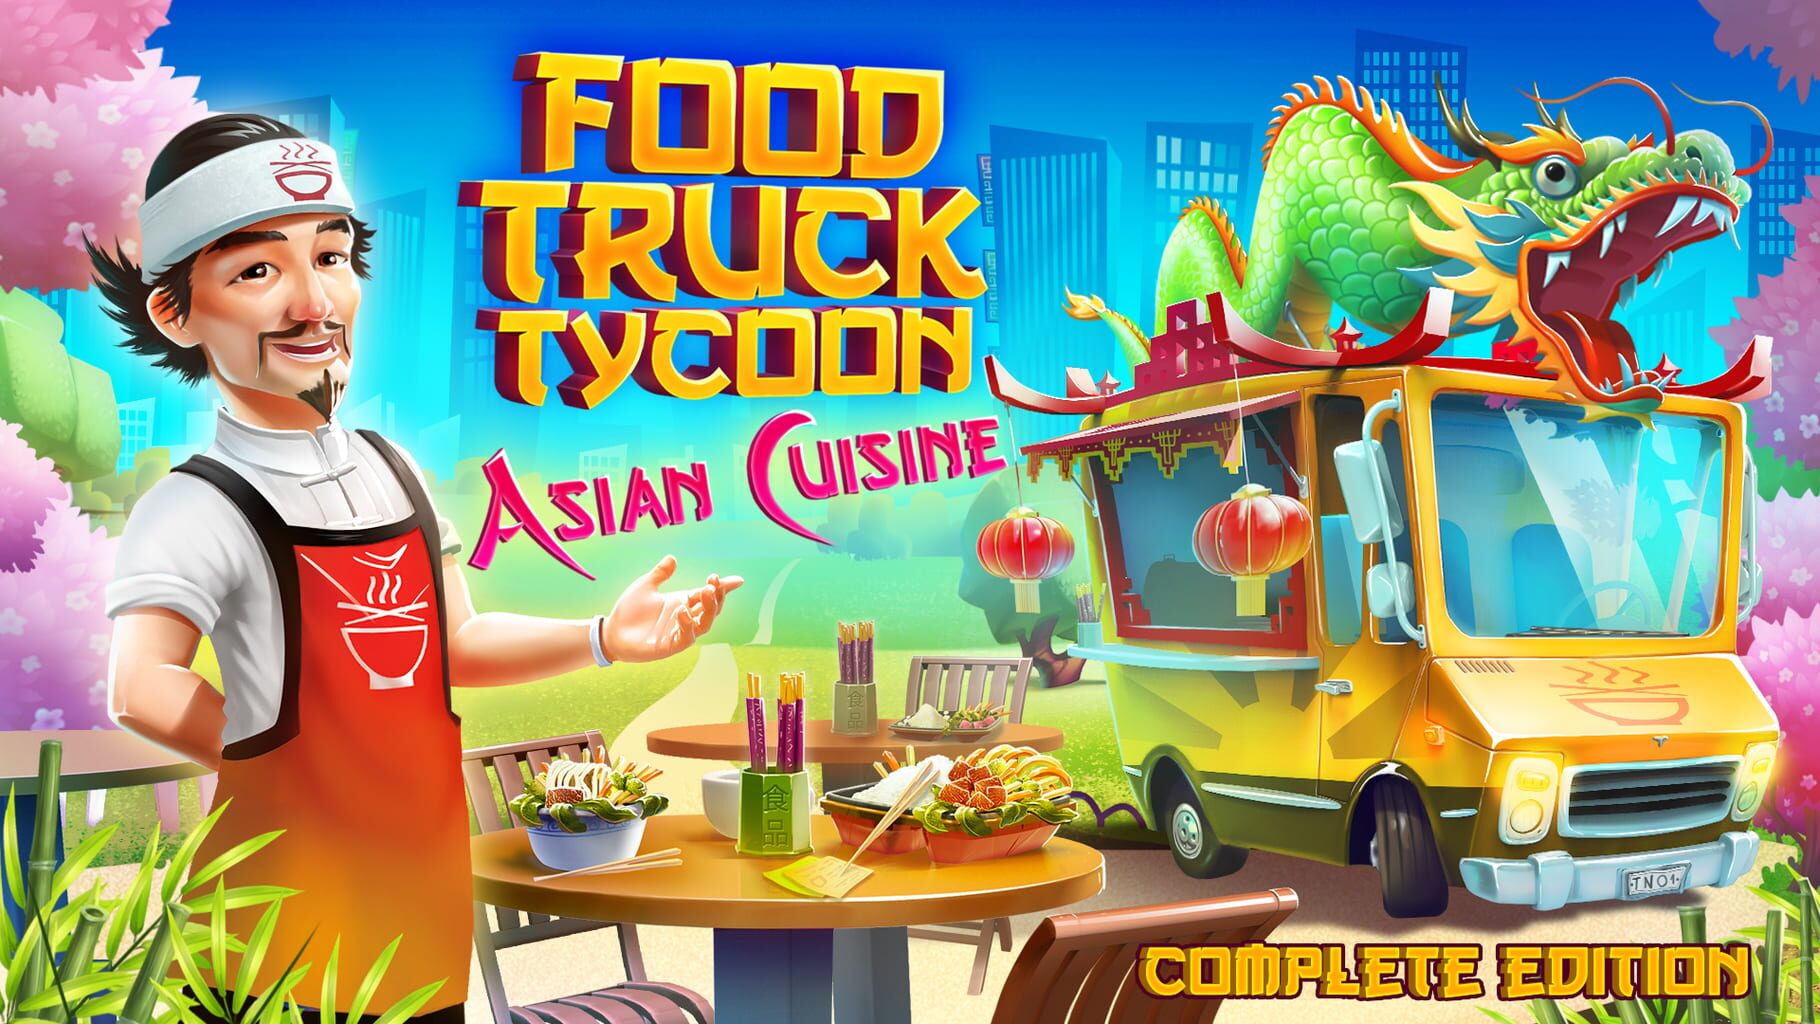 Food Truck Tycoon: Asian Cuisine - Complete Edition artwork